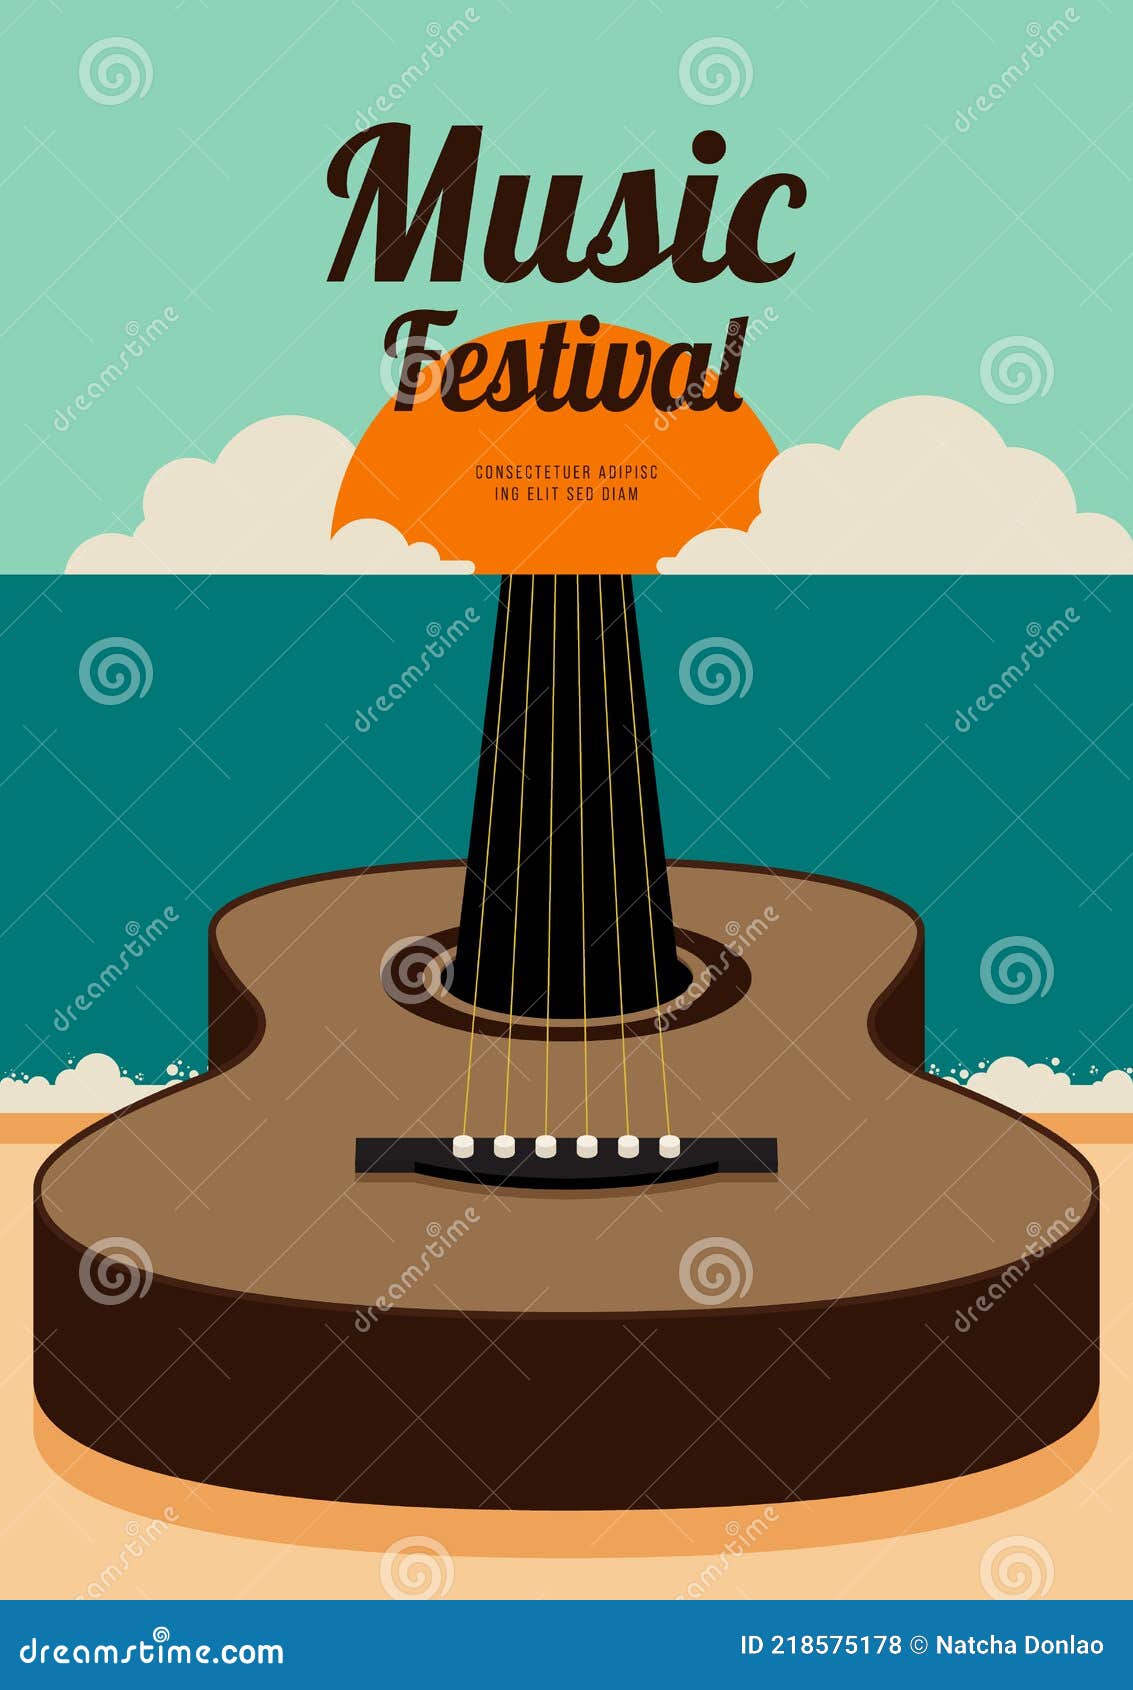 Music Festival Poster Design Template Background Decorative with Guitar  Stock Vector - Illustration of music, design: 218575178